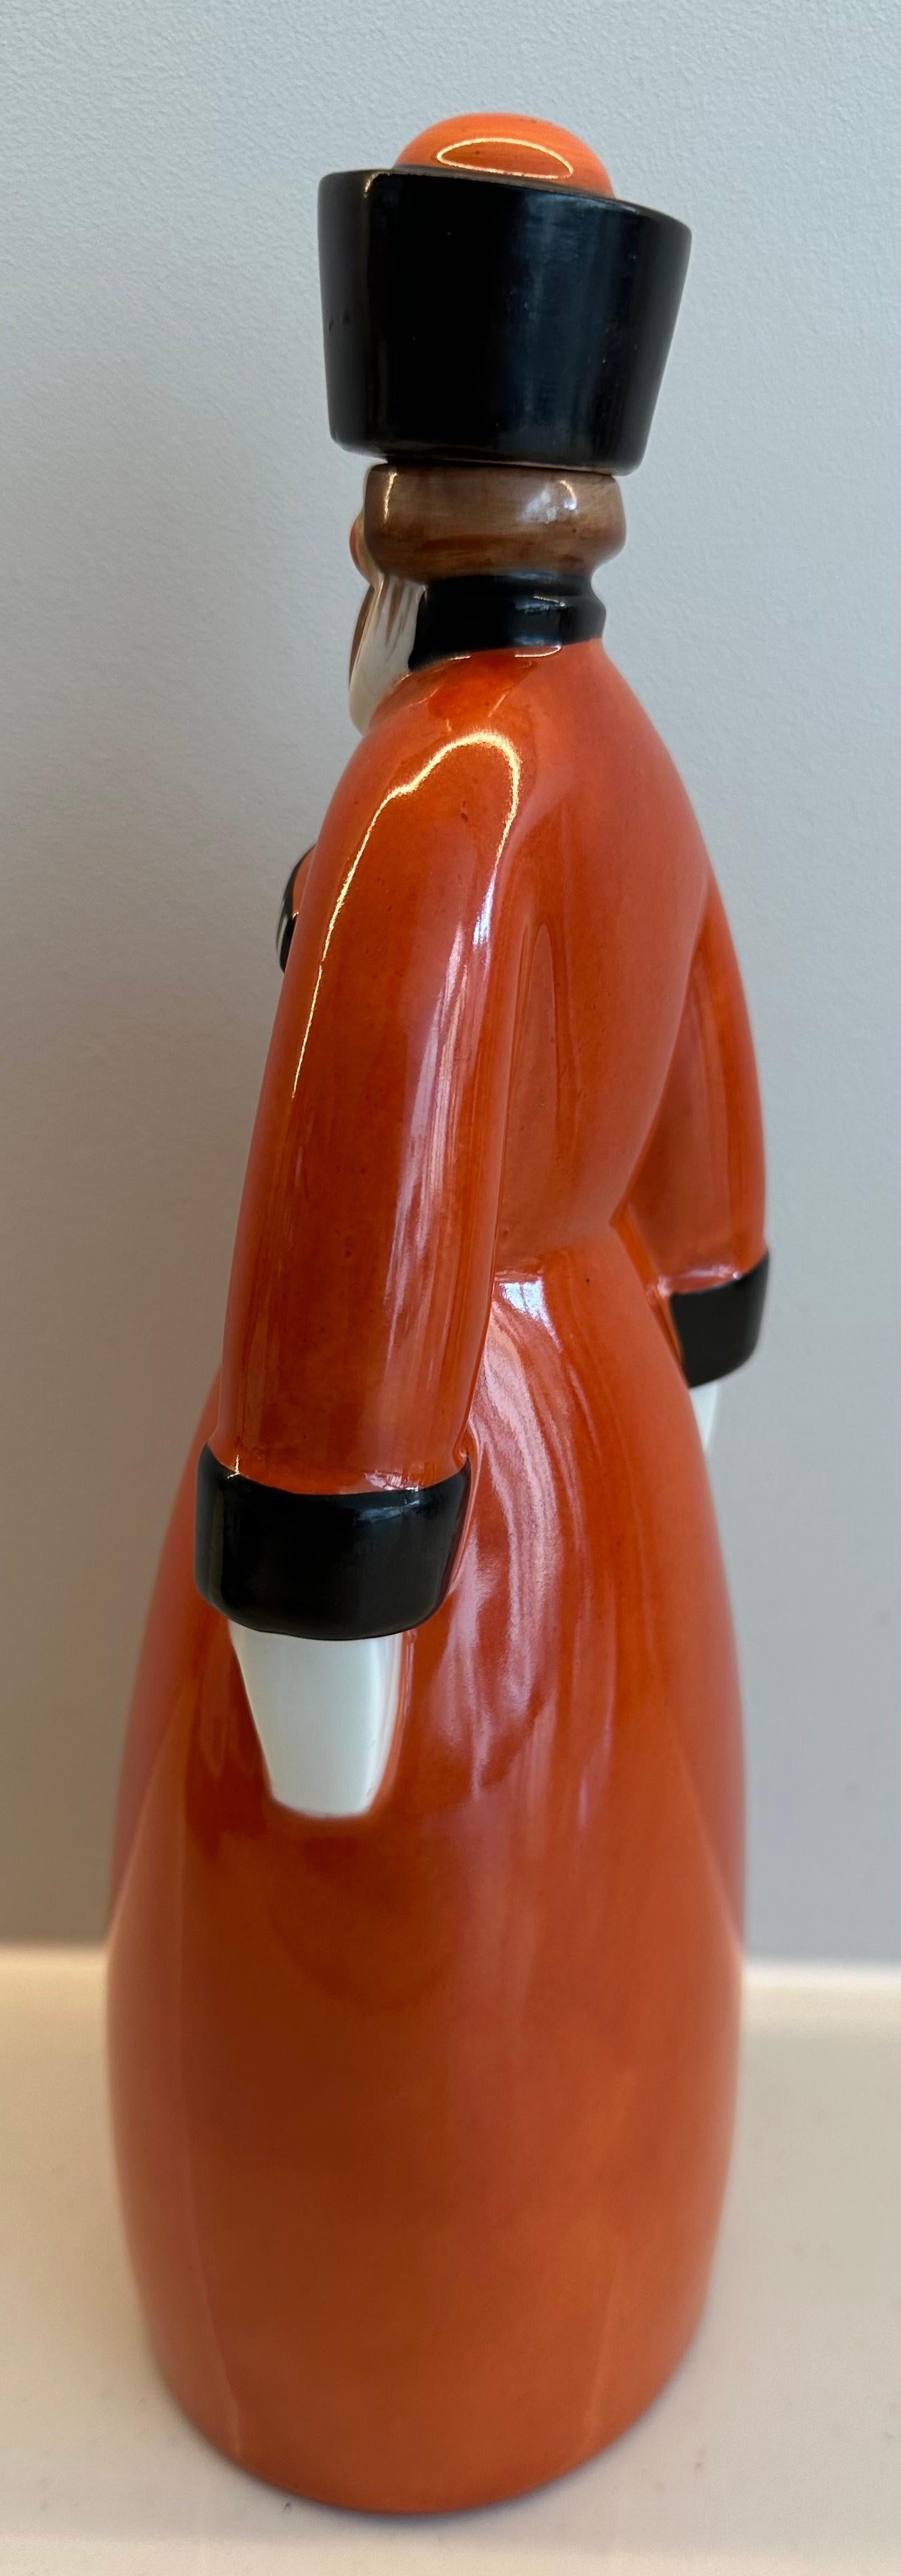 20th Century Art Deco 1930s French “Curacao” Figural Russian Soldier Flask by Robj Paris For Sale